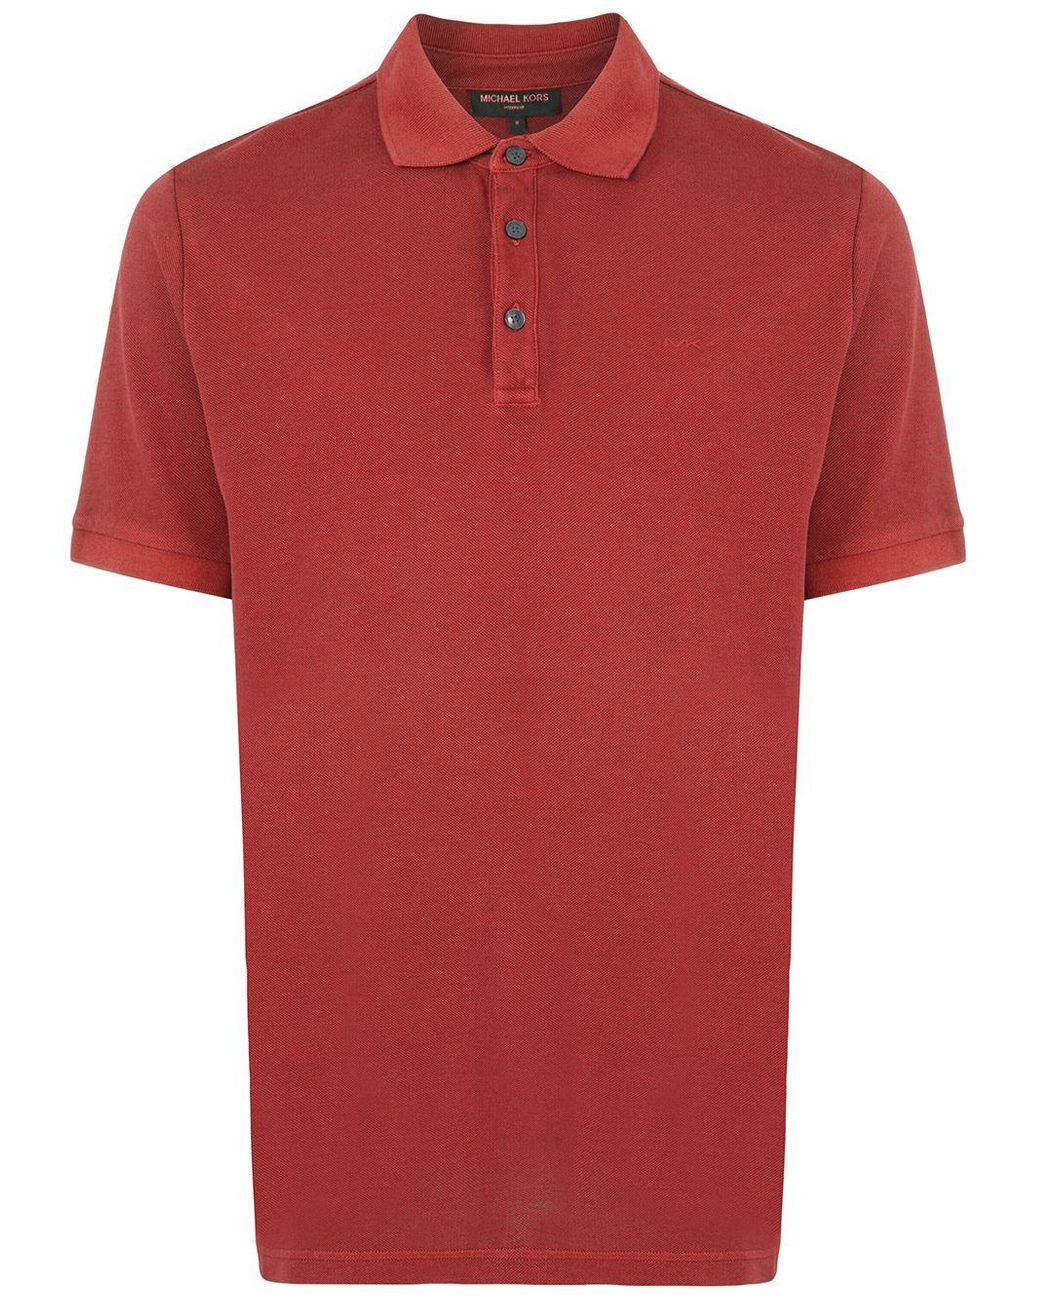 Michael Kors Cotton Classic Polo Shirt in Red for Men - Lyst